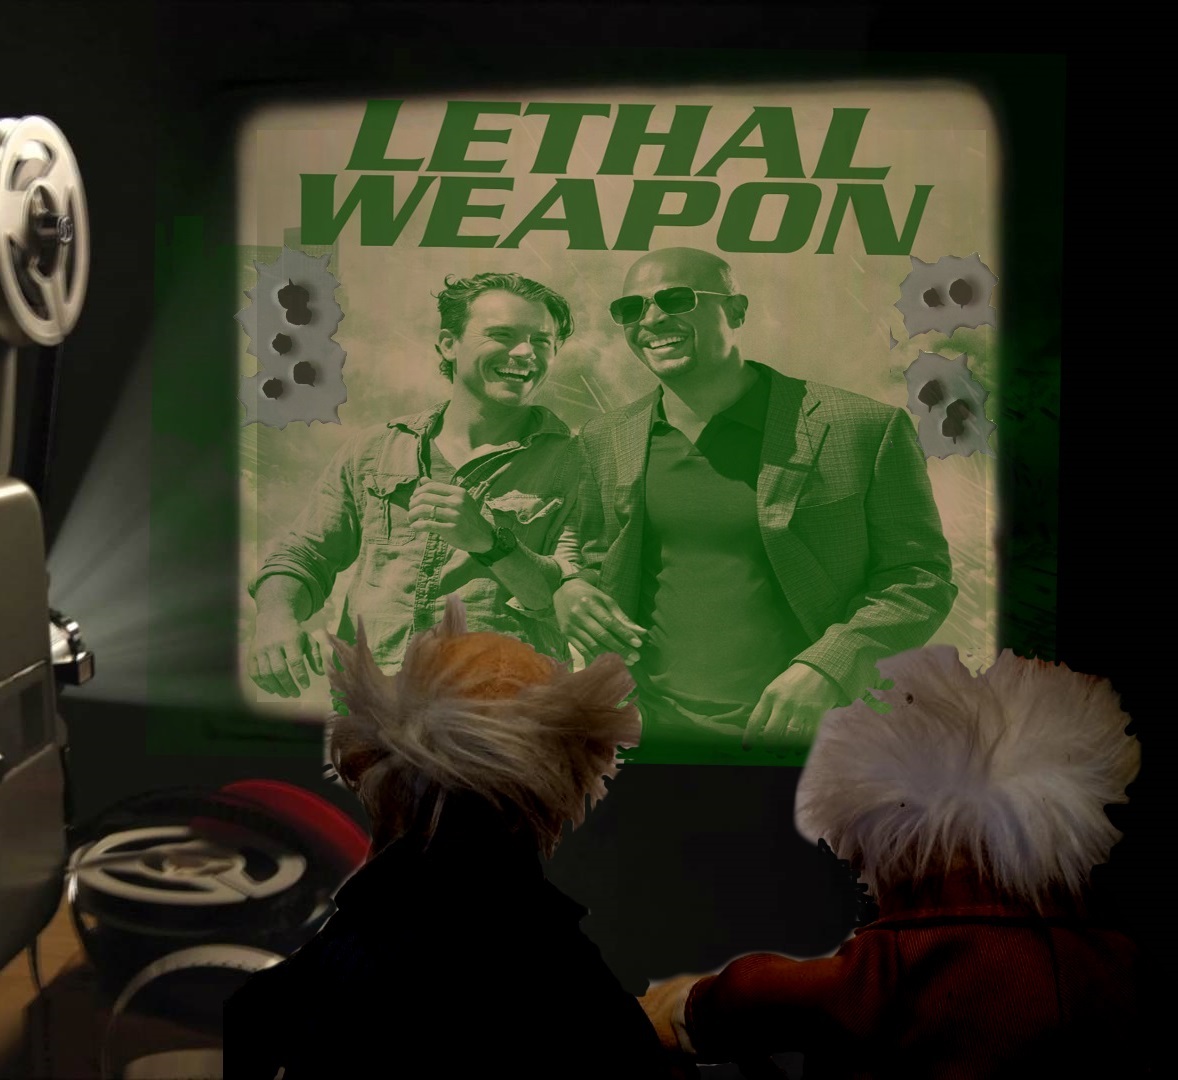 Lethal Weapon (TV Series 2017)